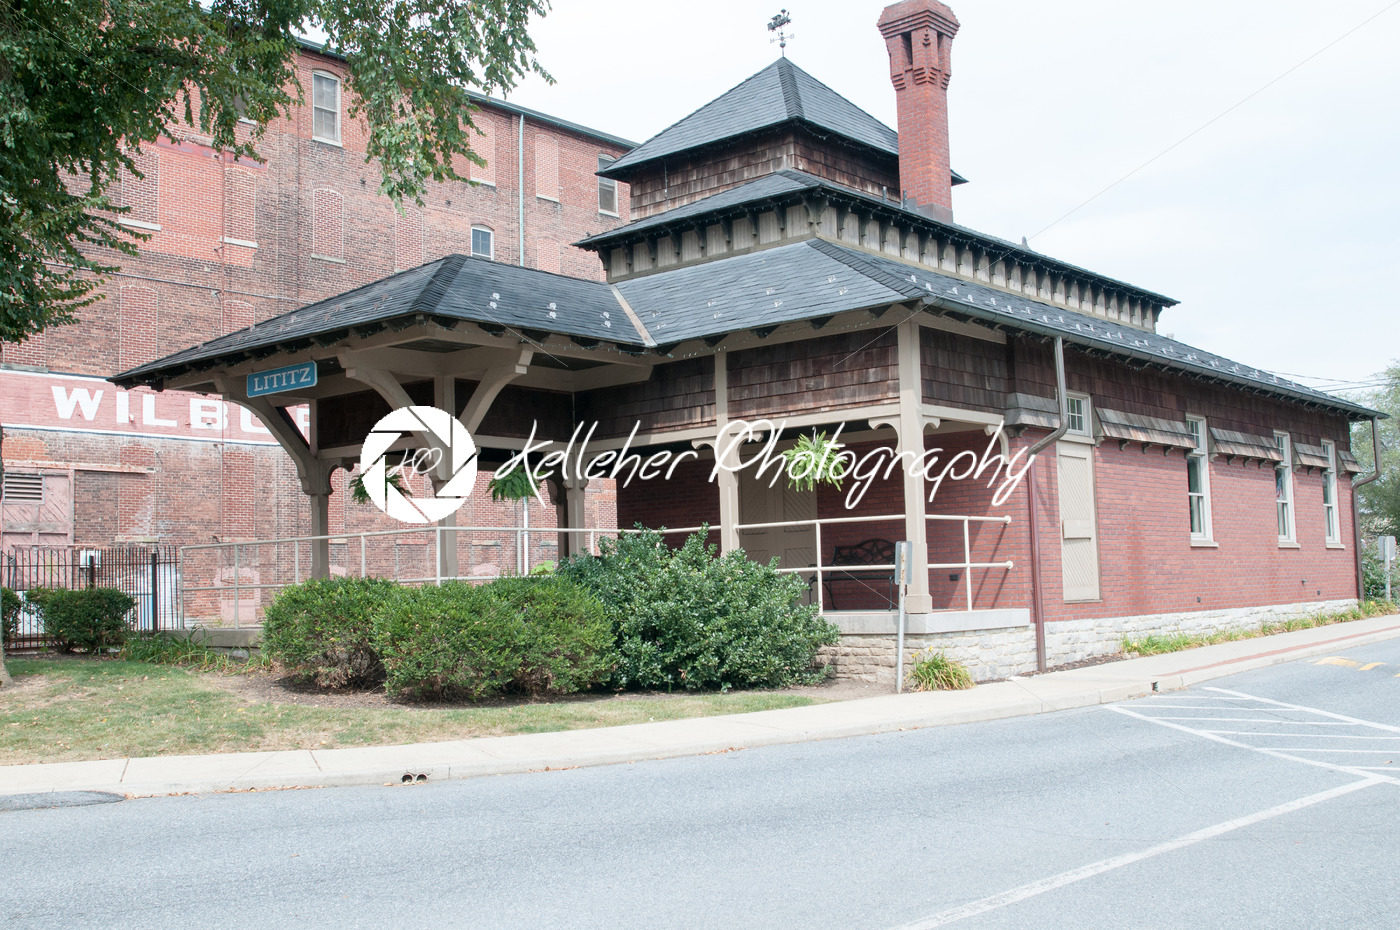 LITITZ, PA – AUGUST 30: Old Lititz Railroad Train Station on August 30, 2014 - Kelleher Photography Store